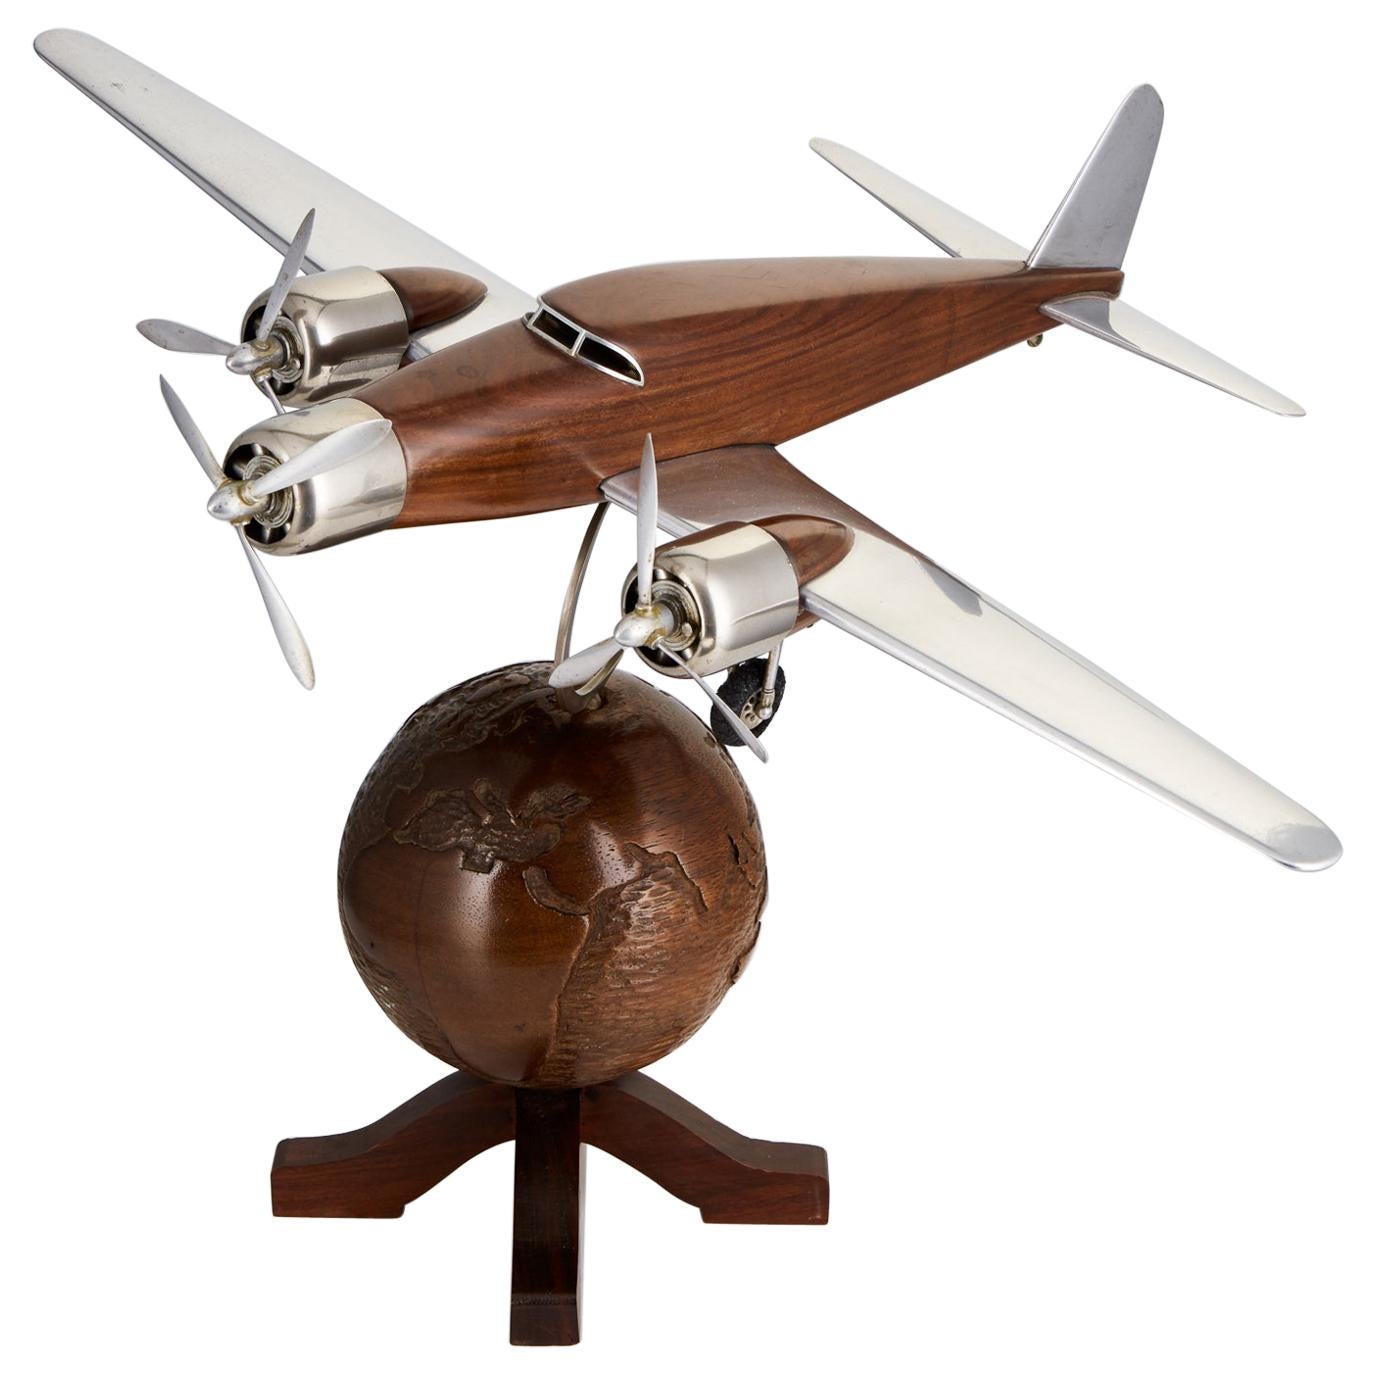 20th Century French Art Deco Model of an Aircraft on a World Globe, circa 1930 For Sale